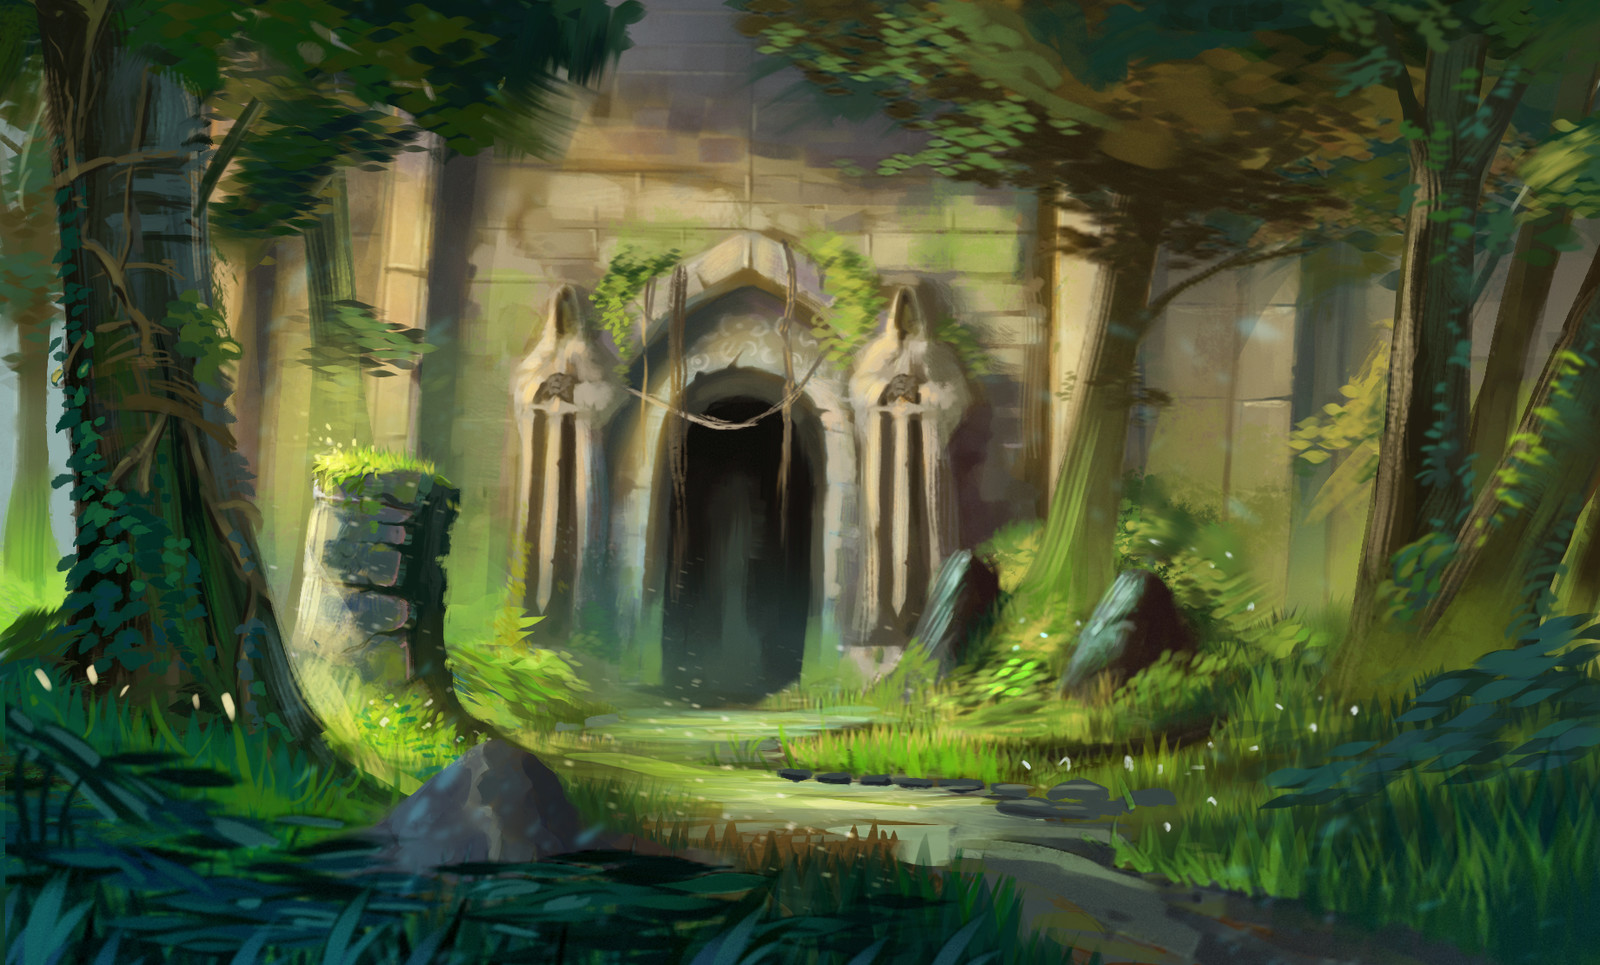 An overgrown stone structure in a dreamlike forest. Two statues stand sentinel near the doorway of the structure. Past the doors lay an unknown shadowy chamber.